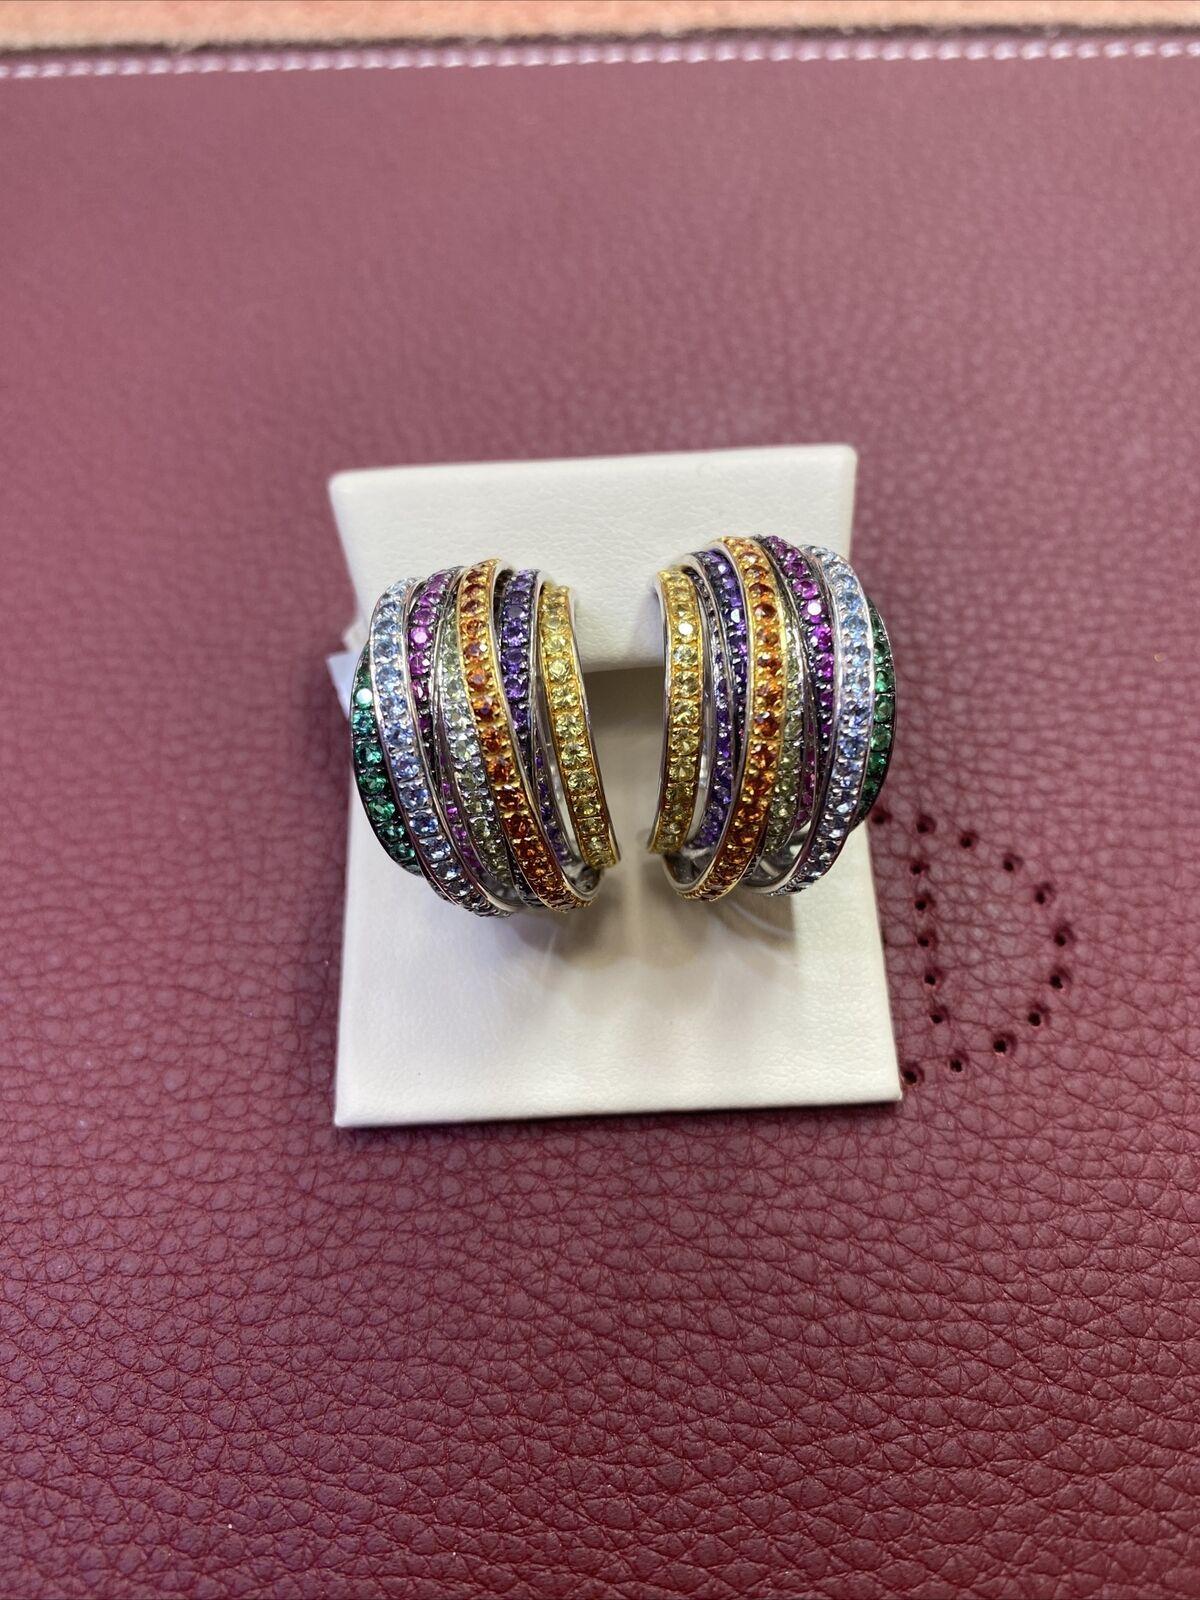 De Grisogono Allegra 18k White Gold Colorful Stones Earrings W/ COA.


Retail for these $32,900


Comes with de GRISIGONO Certificate if Authenticity


Reference 14002/08